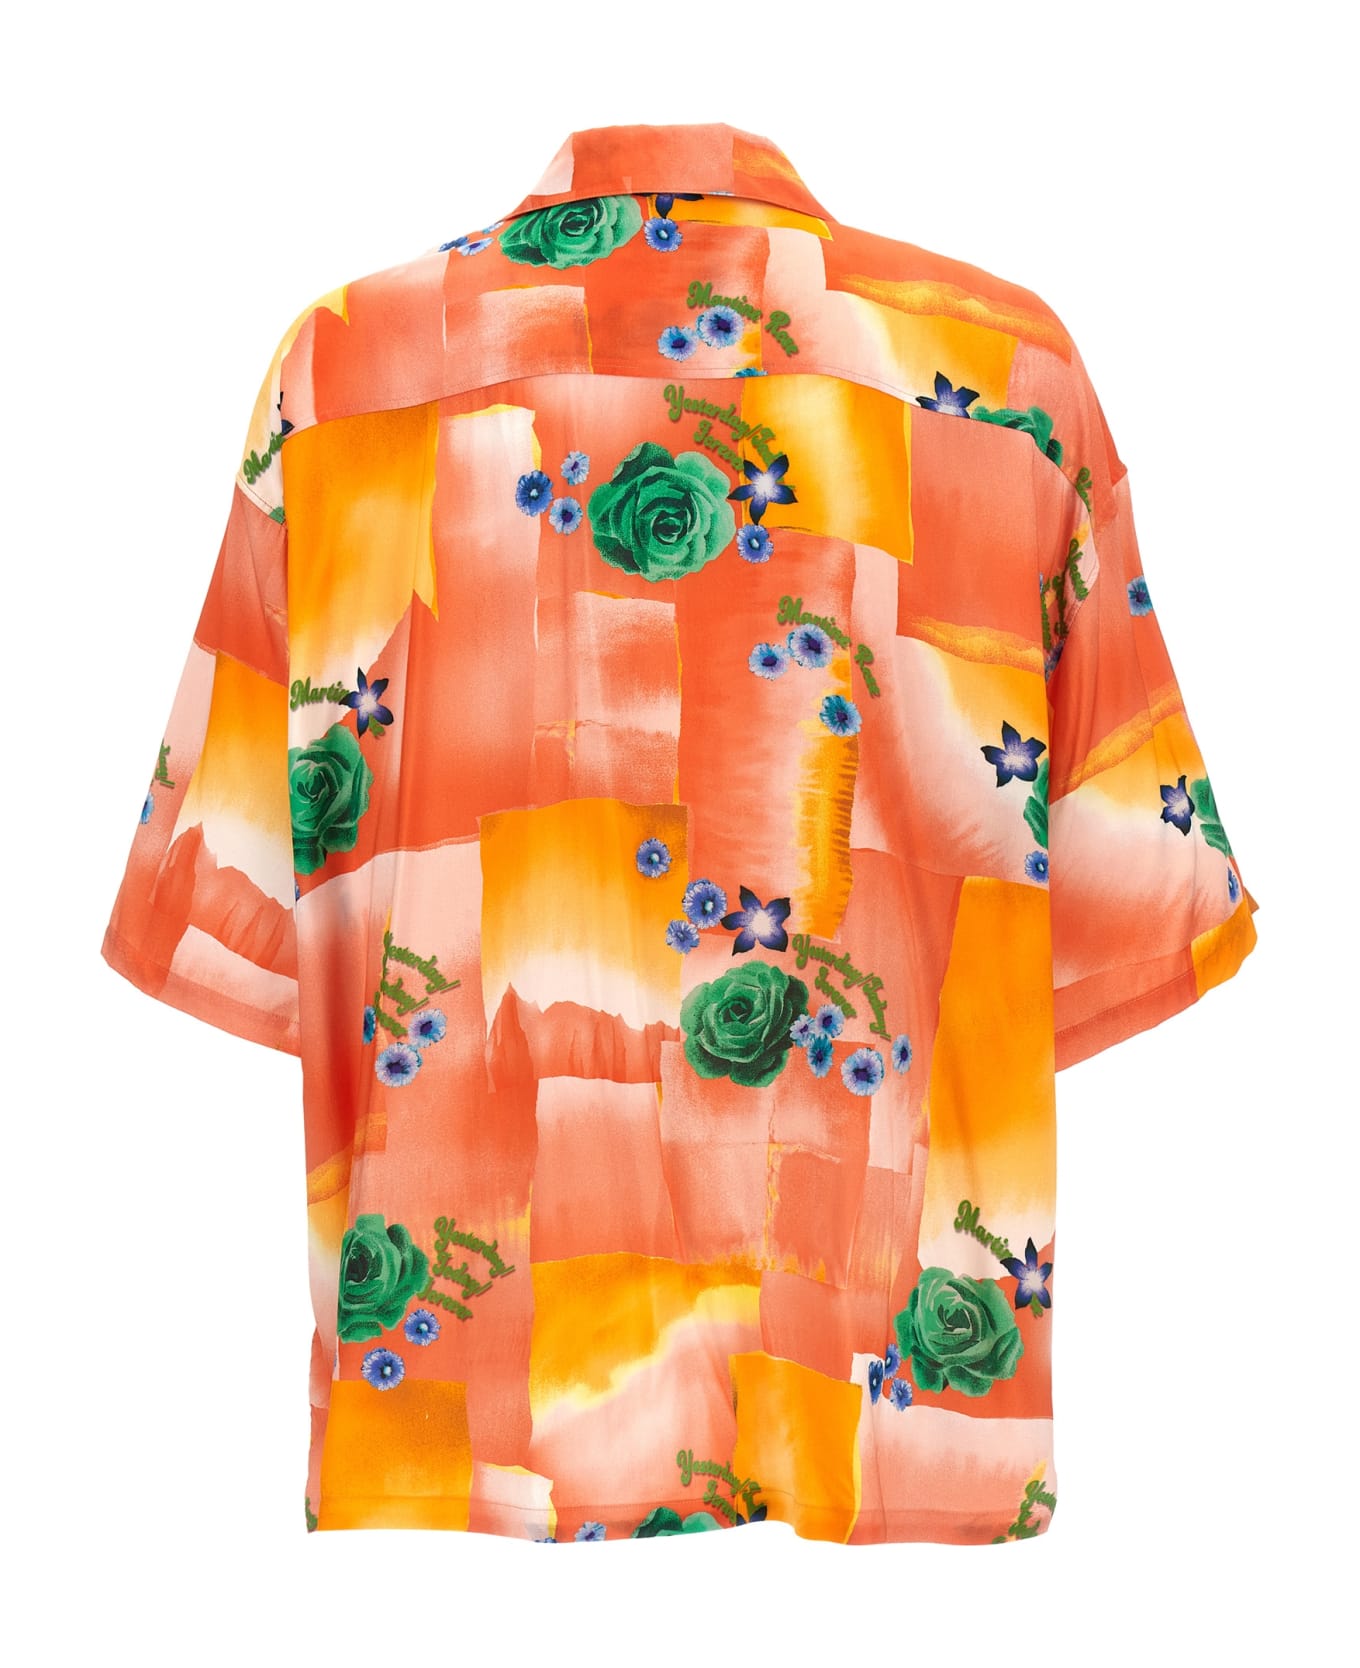 Martine Rose 'today Floral Coral' Shirt - Multicolor シャツ